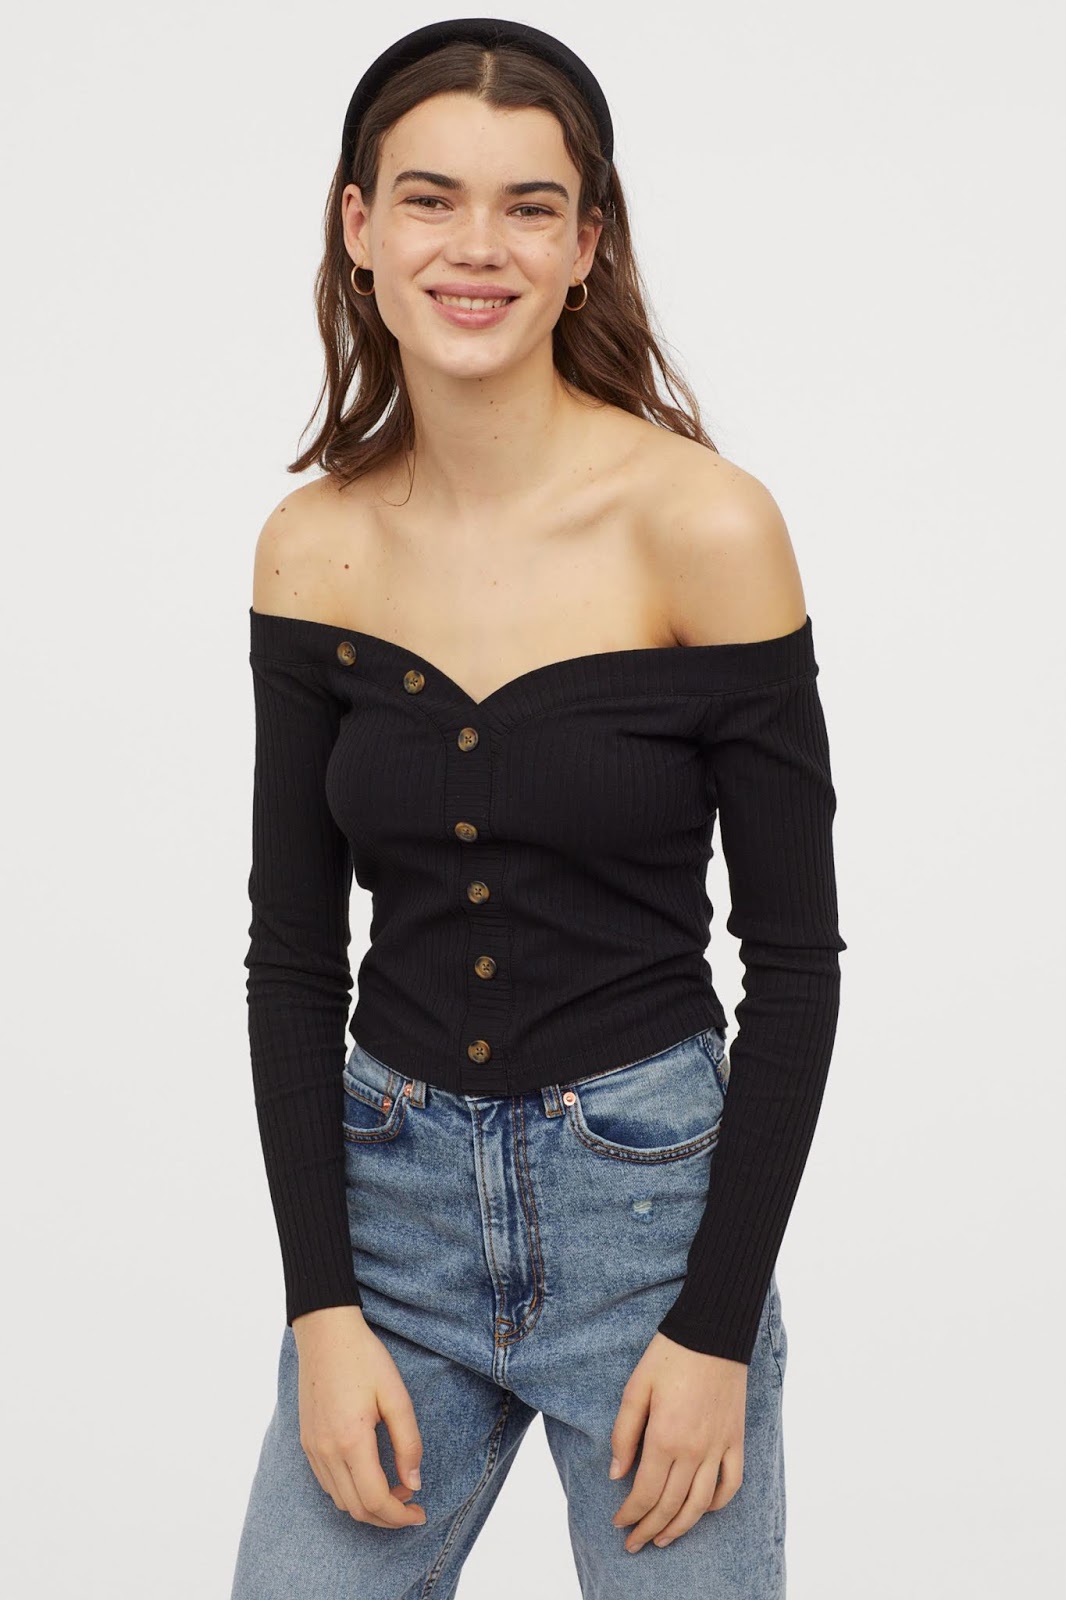 Budget-Friendly Spring Style — Under-$20 Black Ribbed Off-The-Shoulder Top, Headband, Hoop Earrings, and Jeans